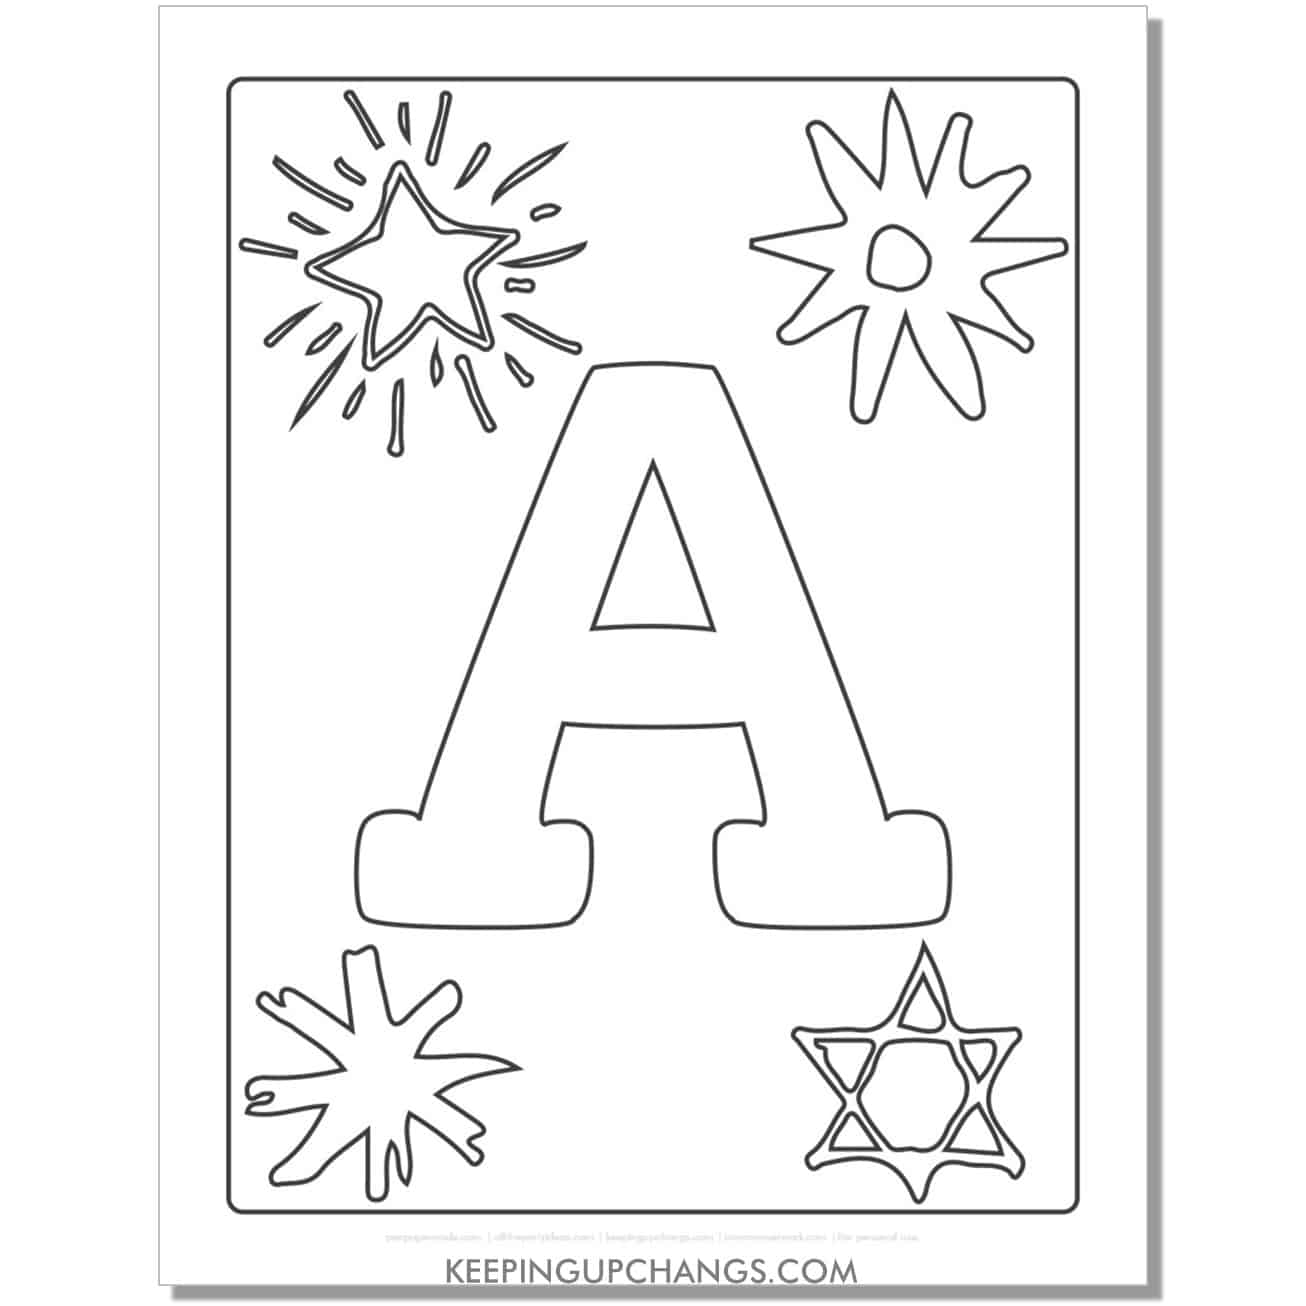 cool letter a to color with stars, space theme.